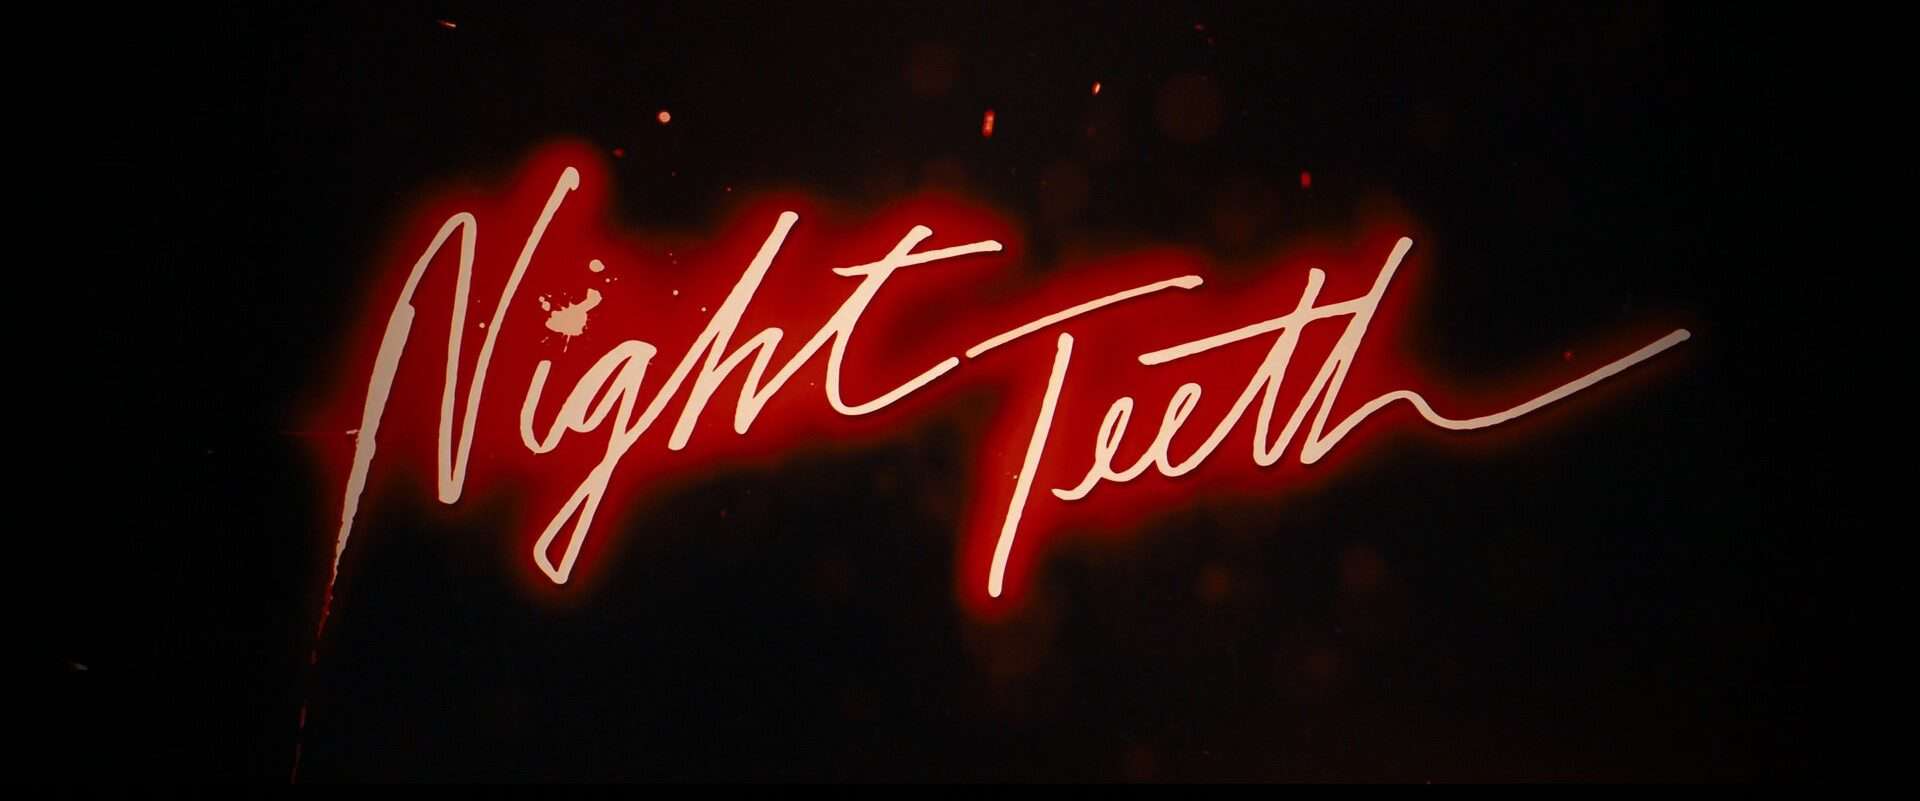 Night Teeth (2021) – Review/ Summary (with Spoilers)